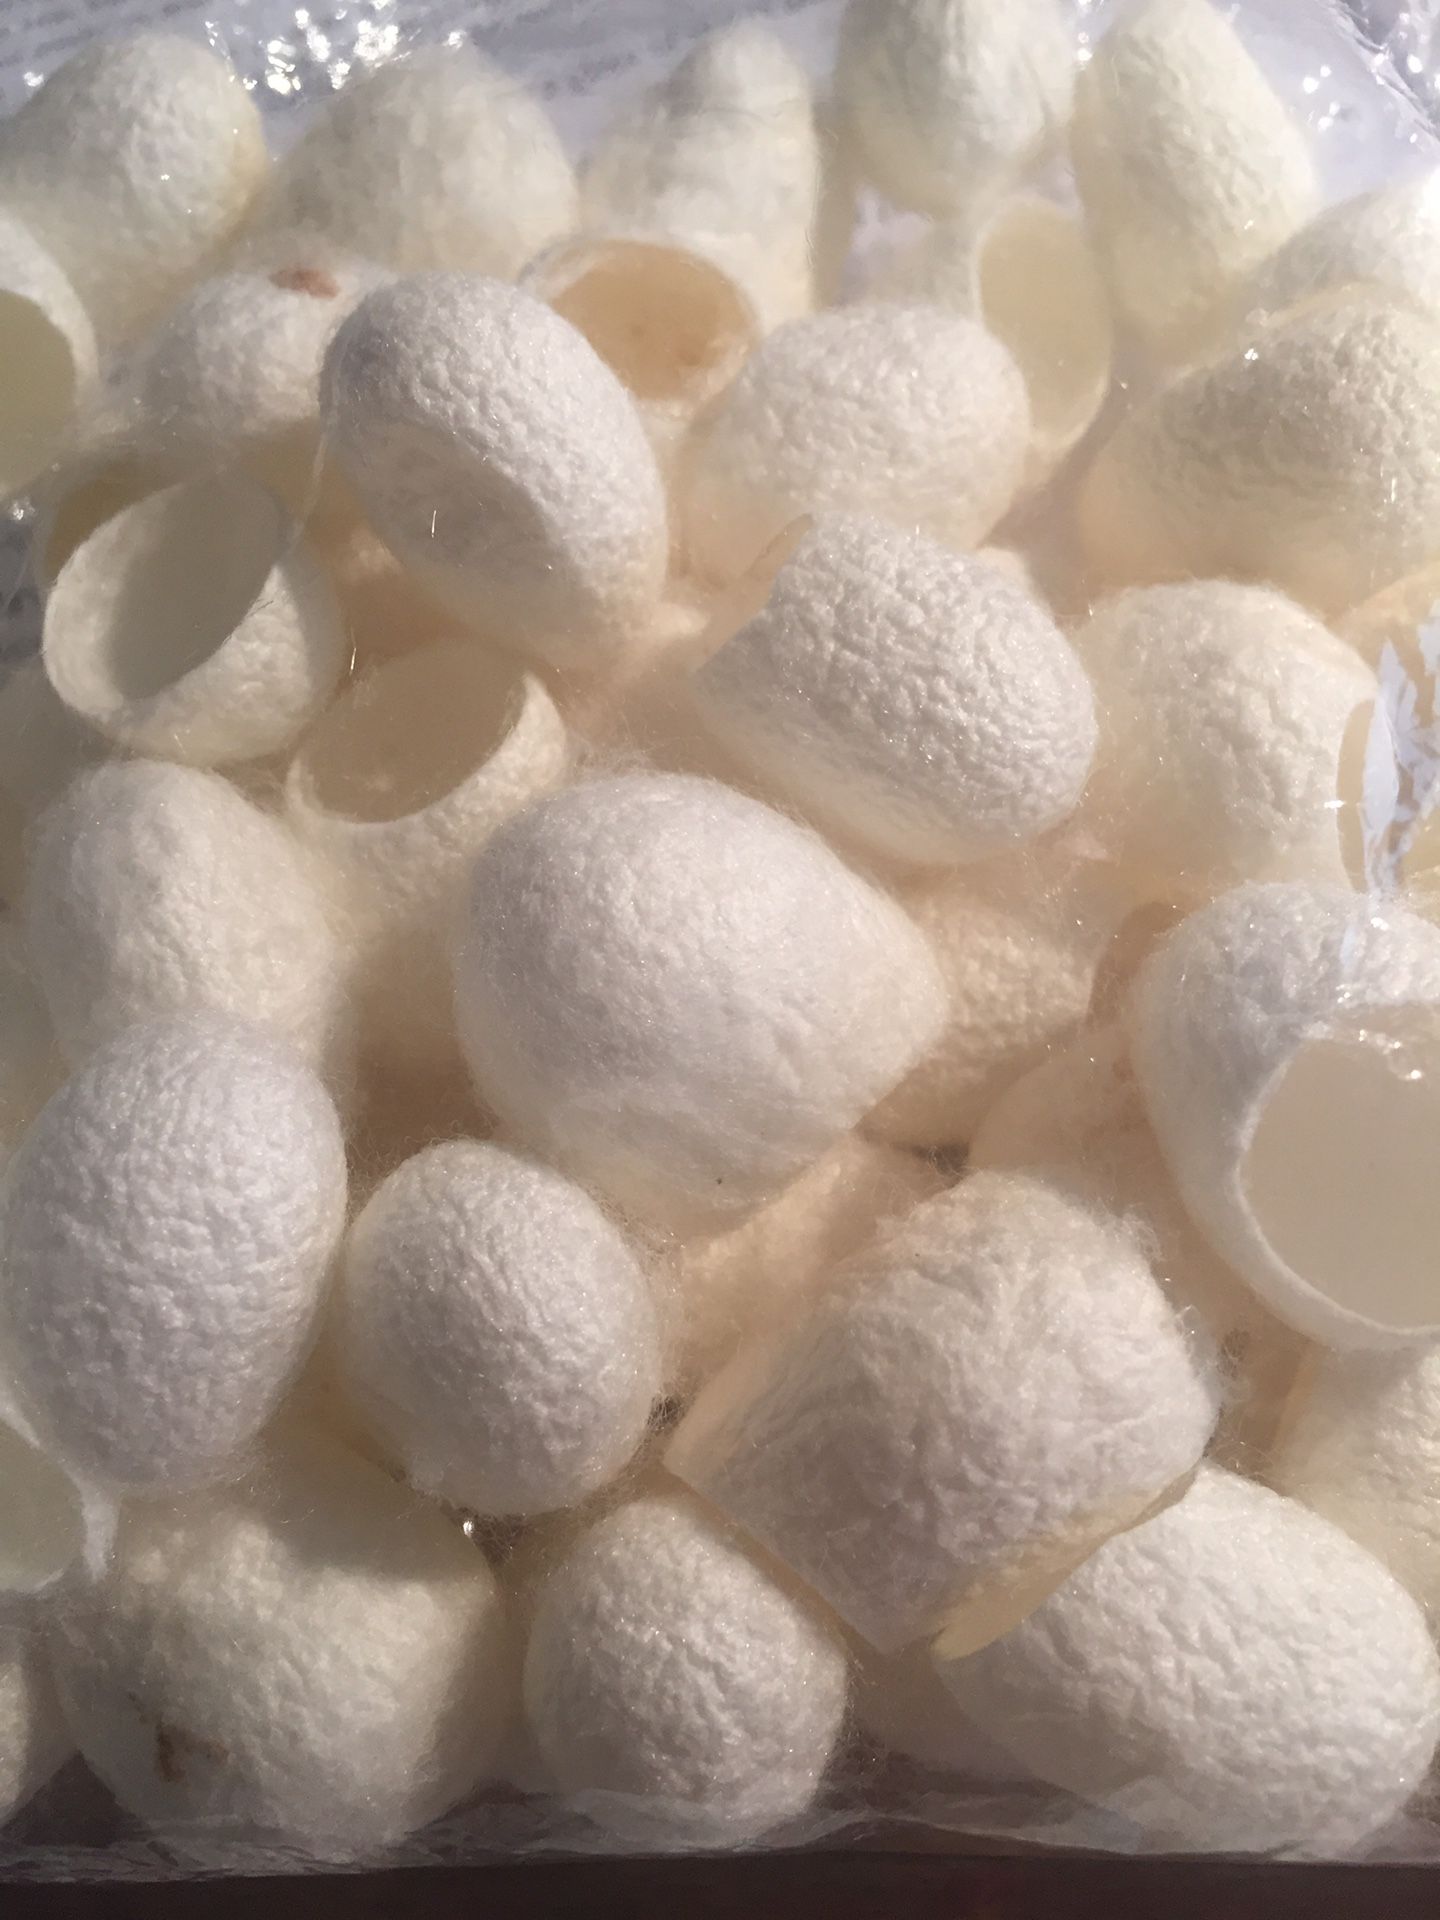 Silk cocoons for skincare or soap making